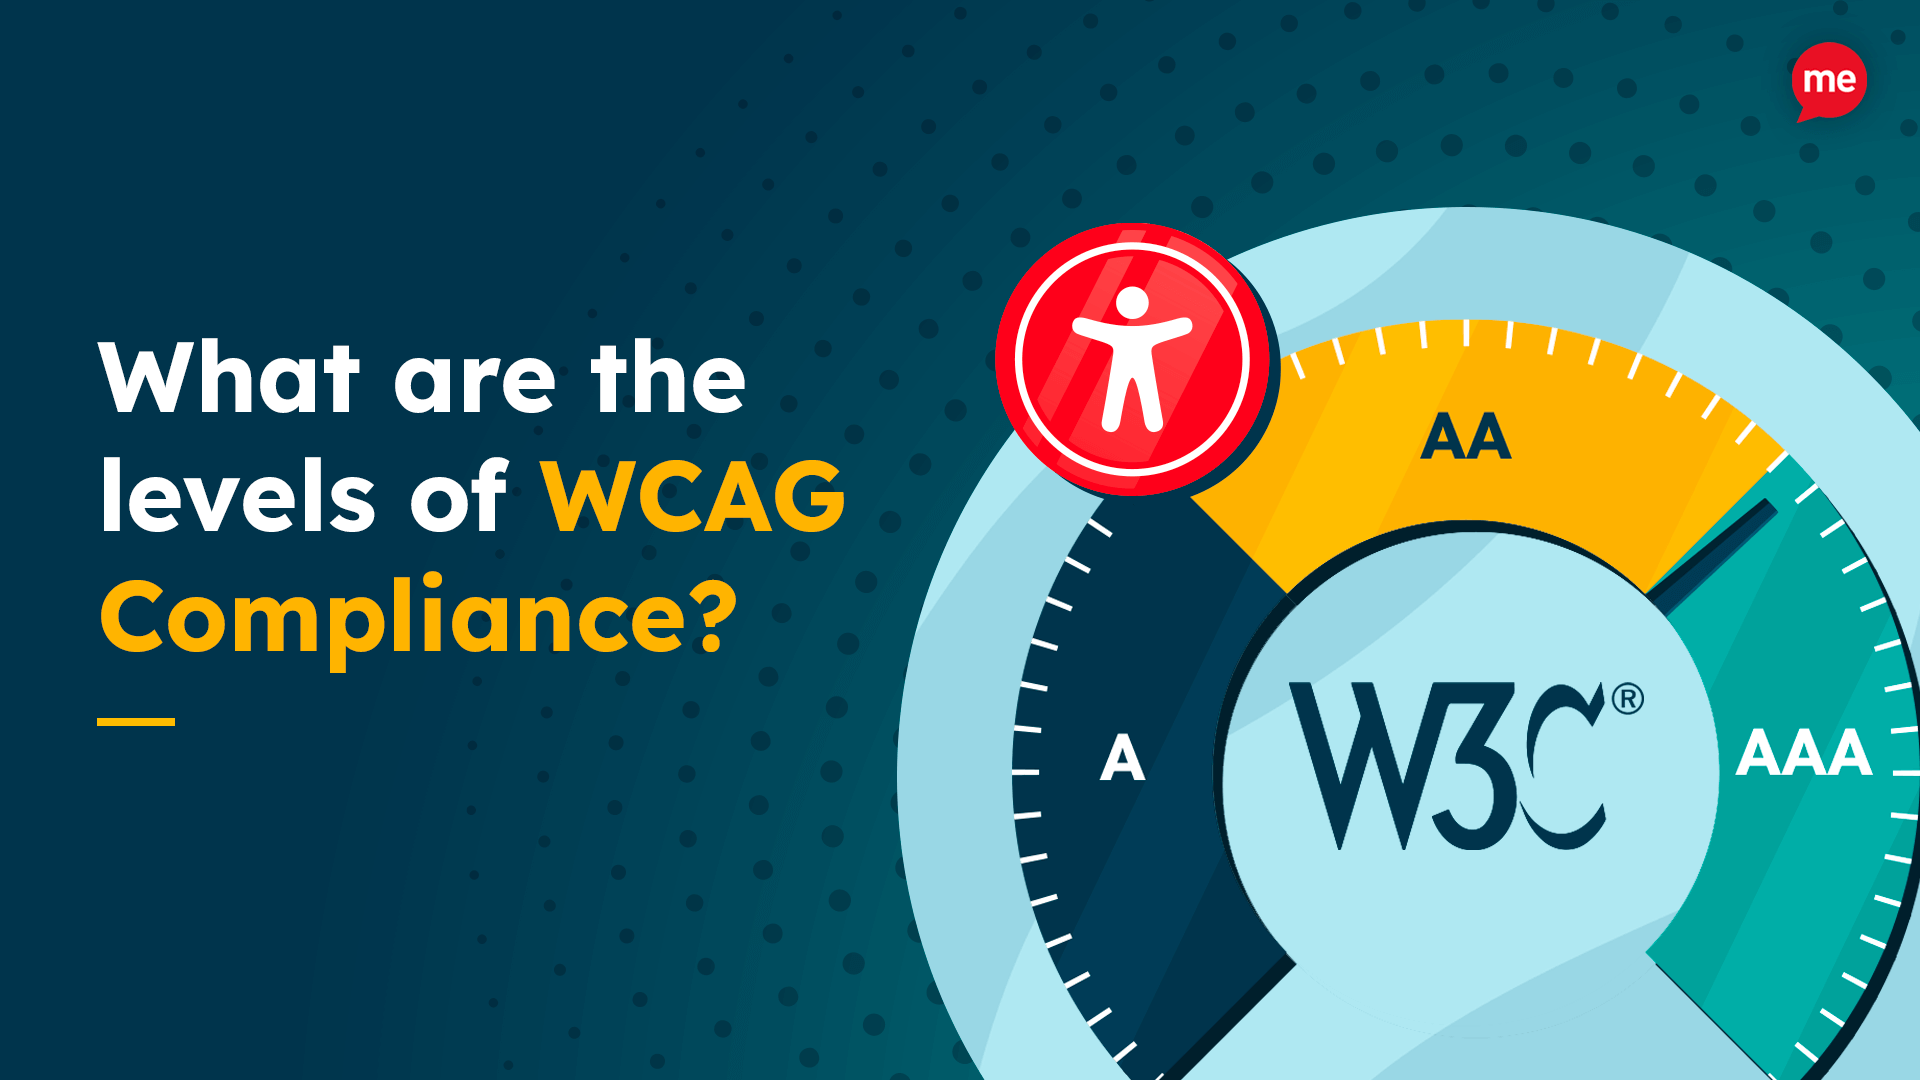 What are the levels of WCAG Compliance